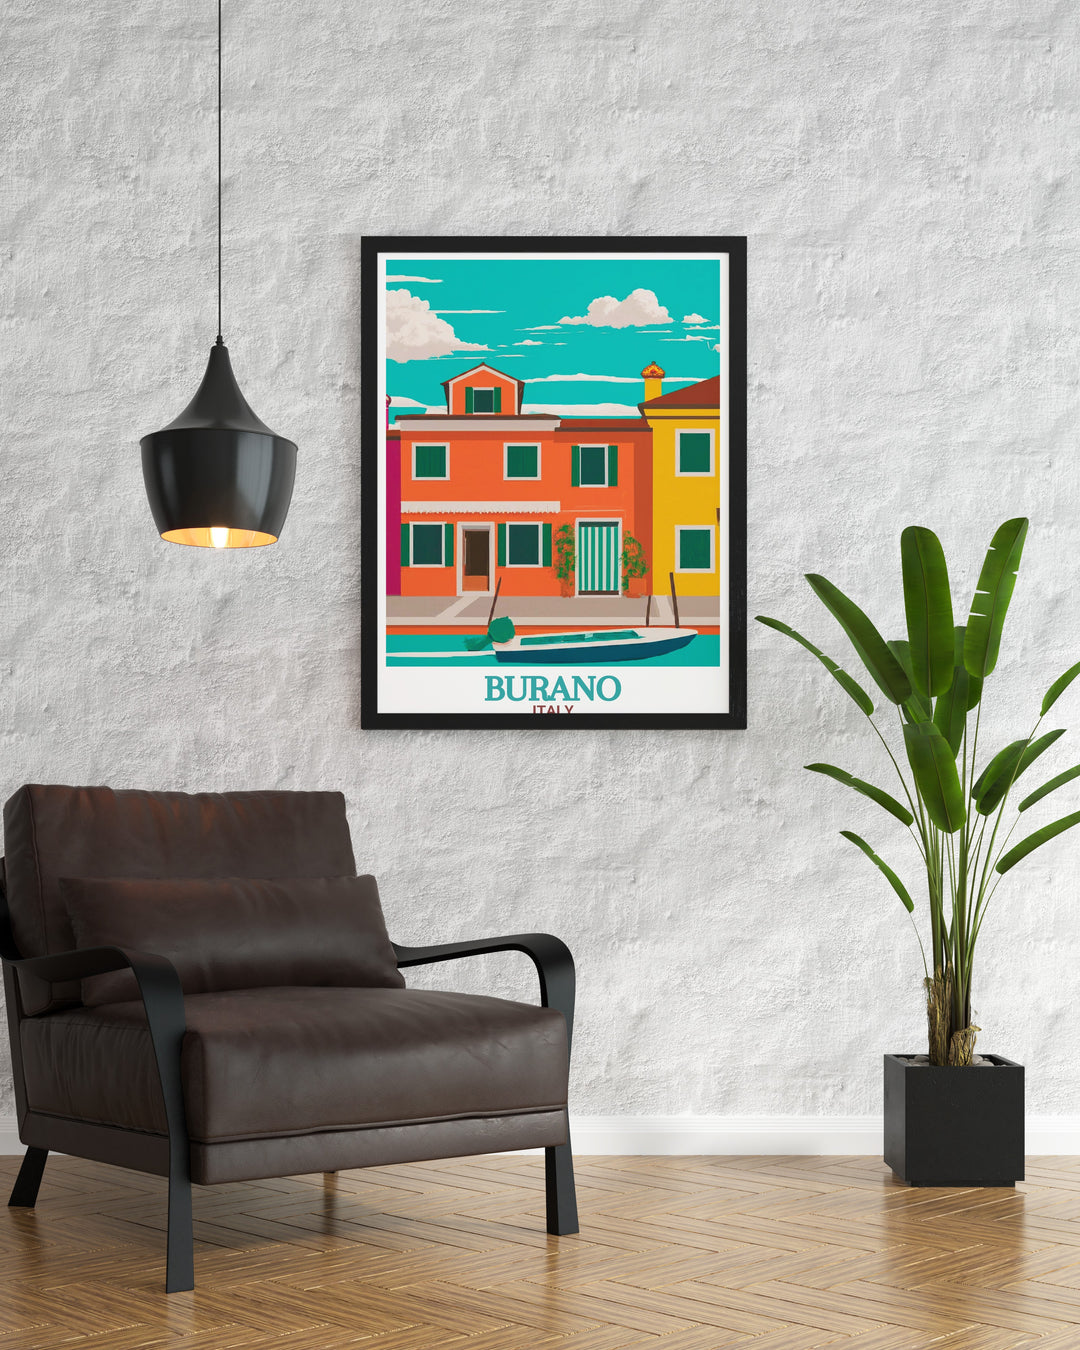 Stunning Burano wall art featuring the colorful houses and tranquil waterways of Burano. This Burano City Print is perfect for enhancing your home decor with a touch of Italian charm and vibrant colors.